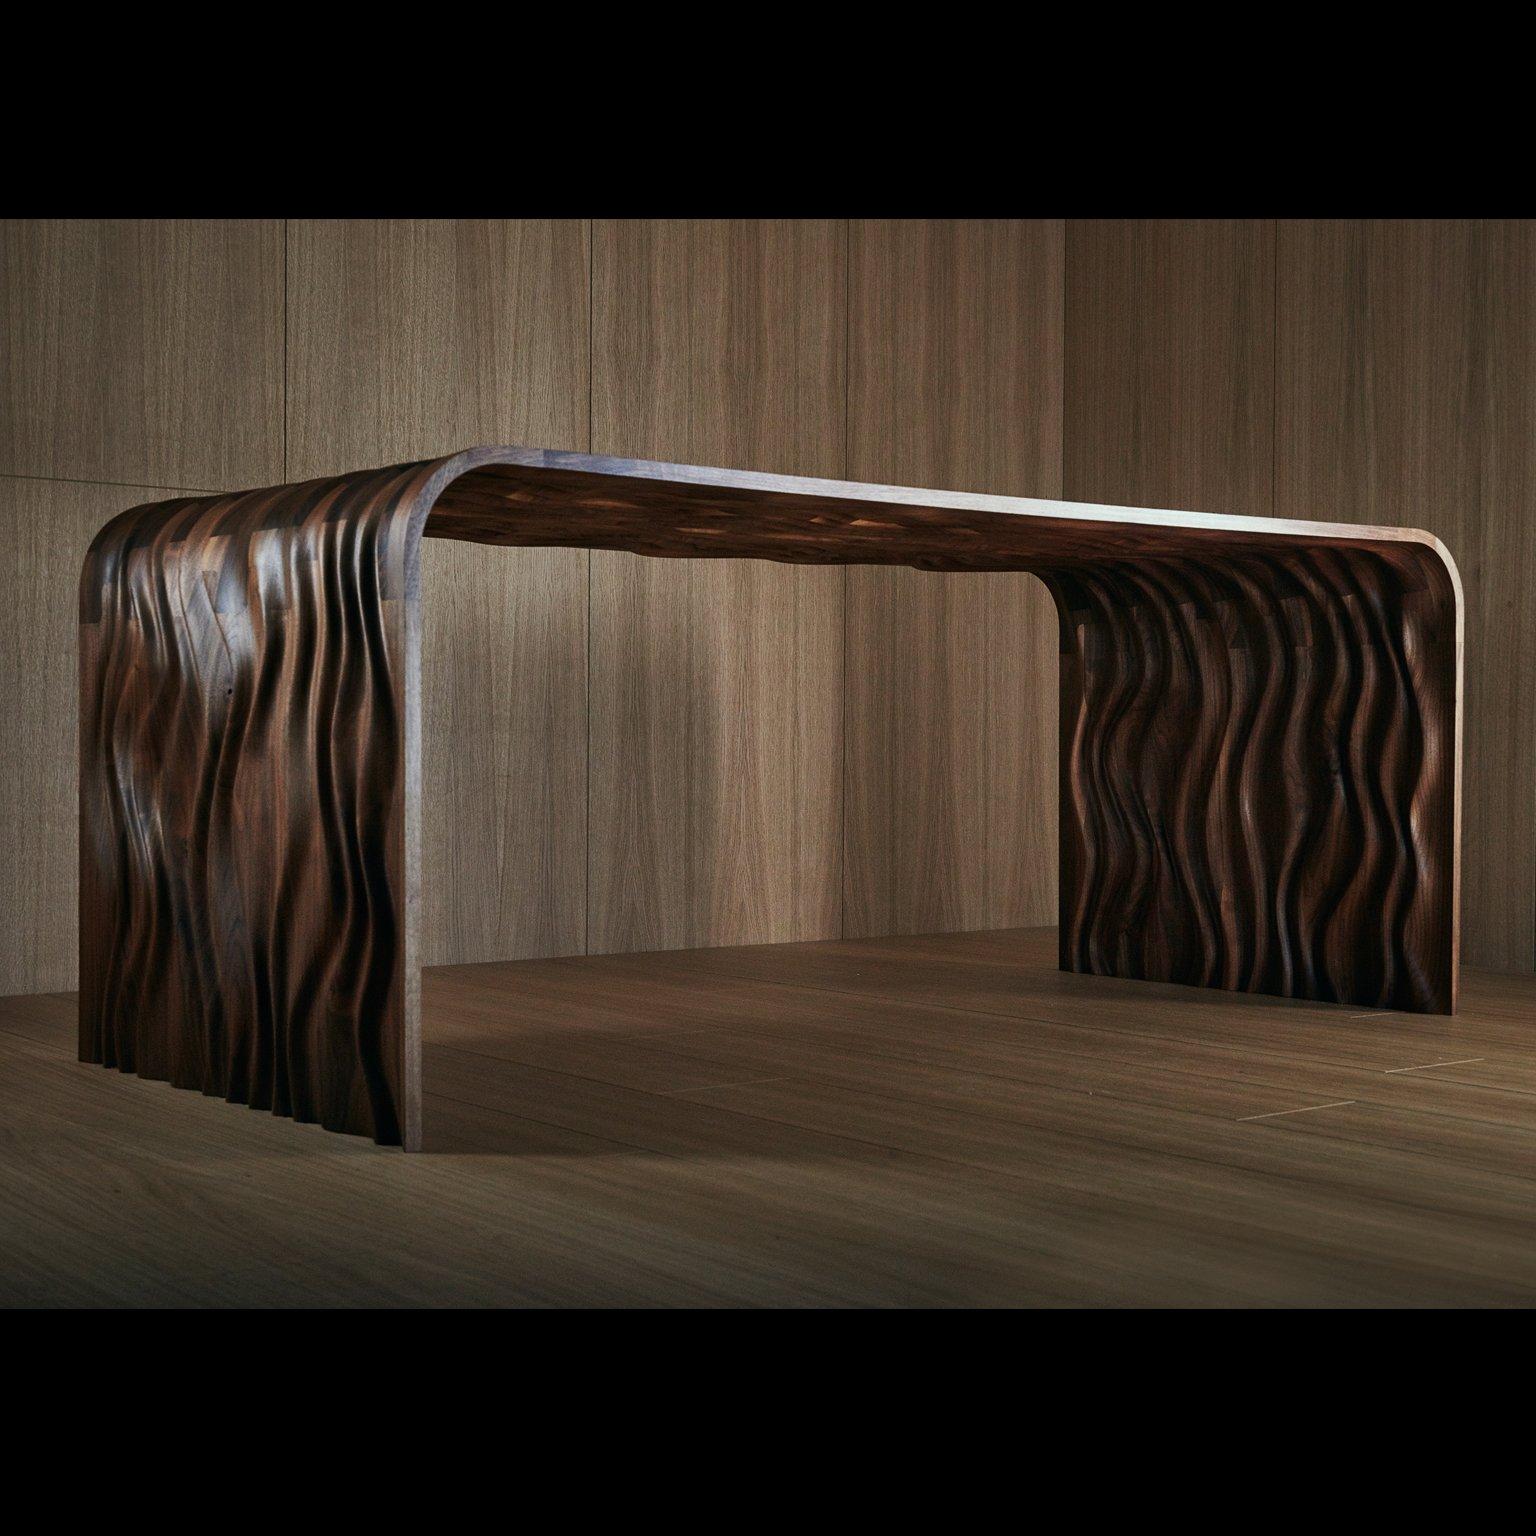 Carved 'Ripple' Contemporary Solid Walnut Table by Object Studio For Sale